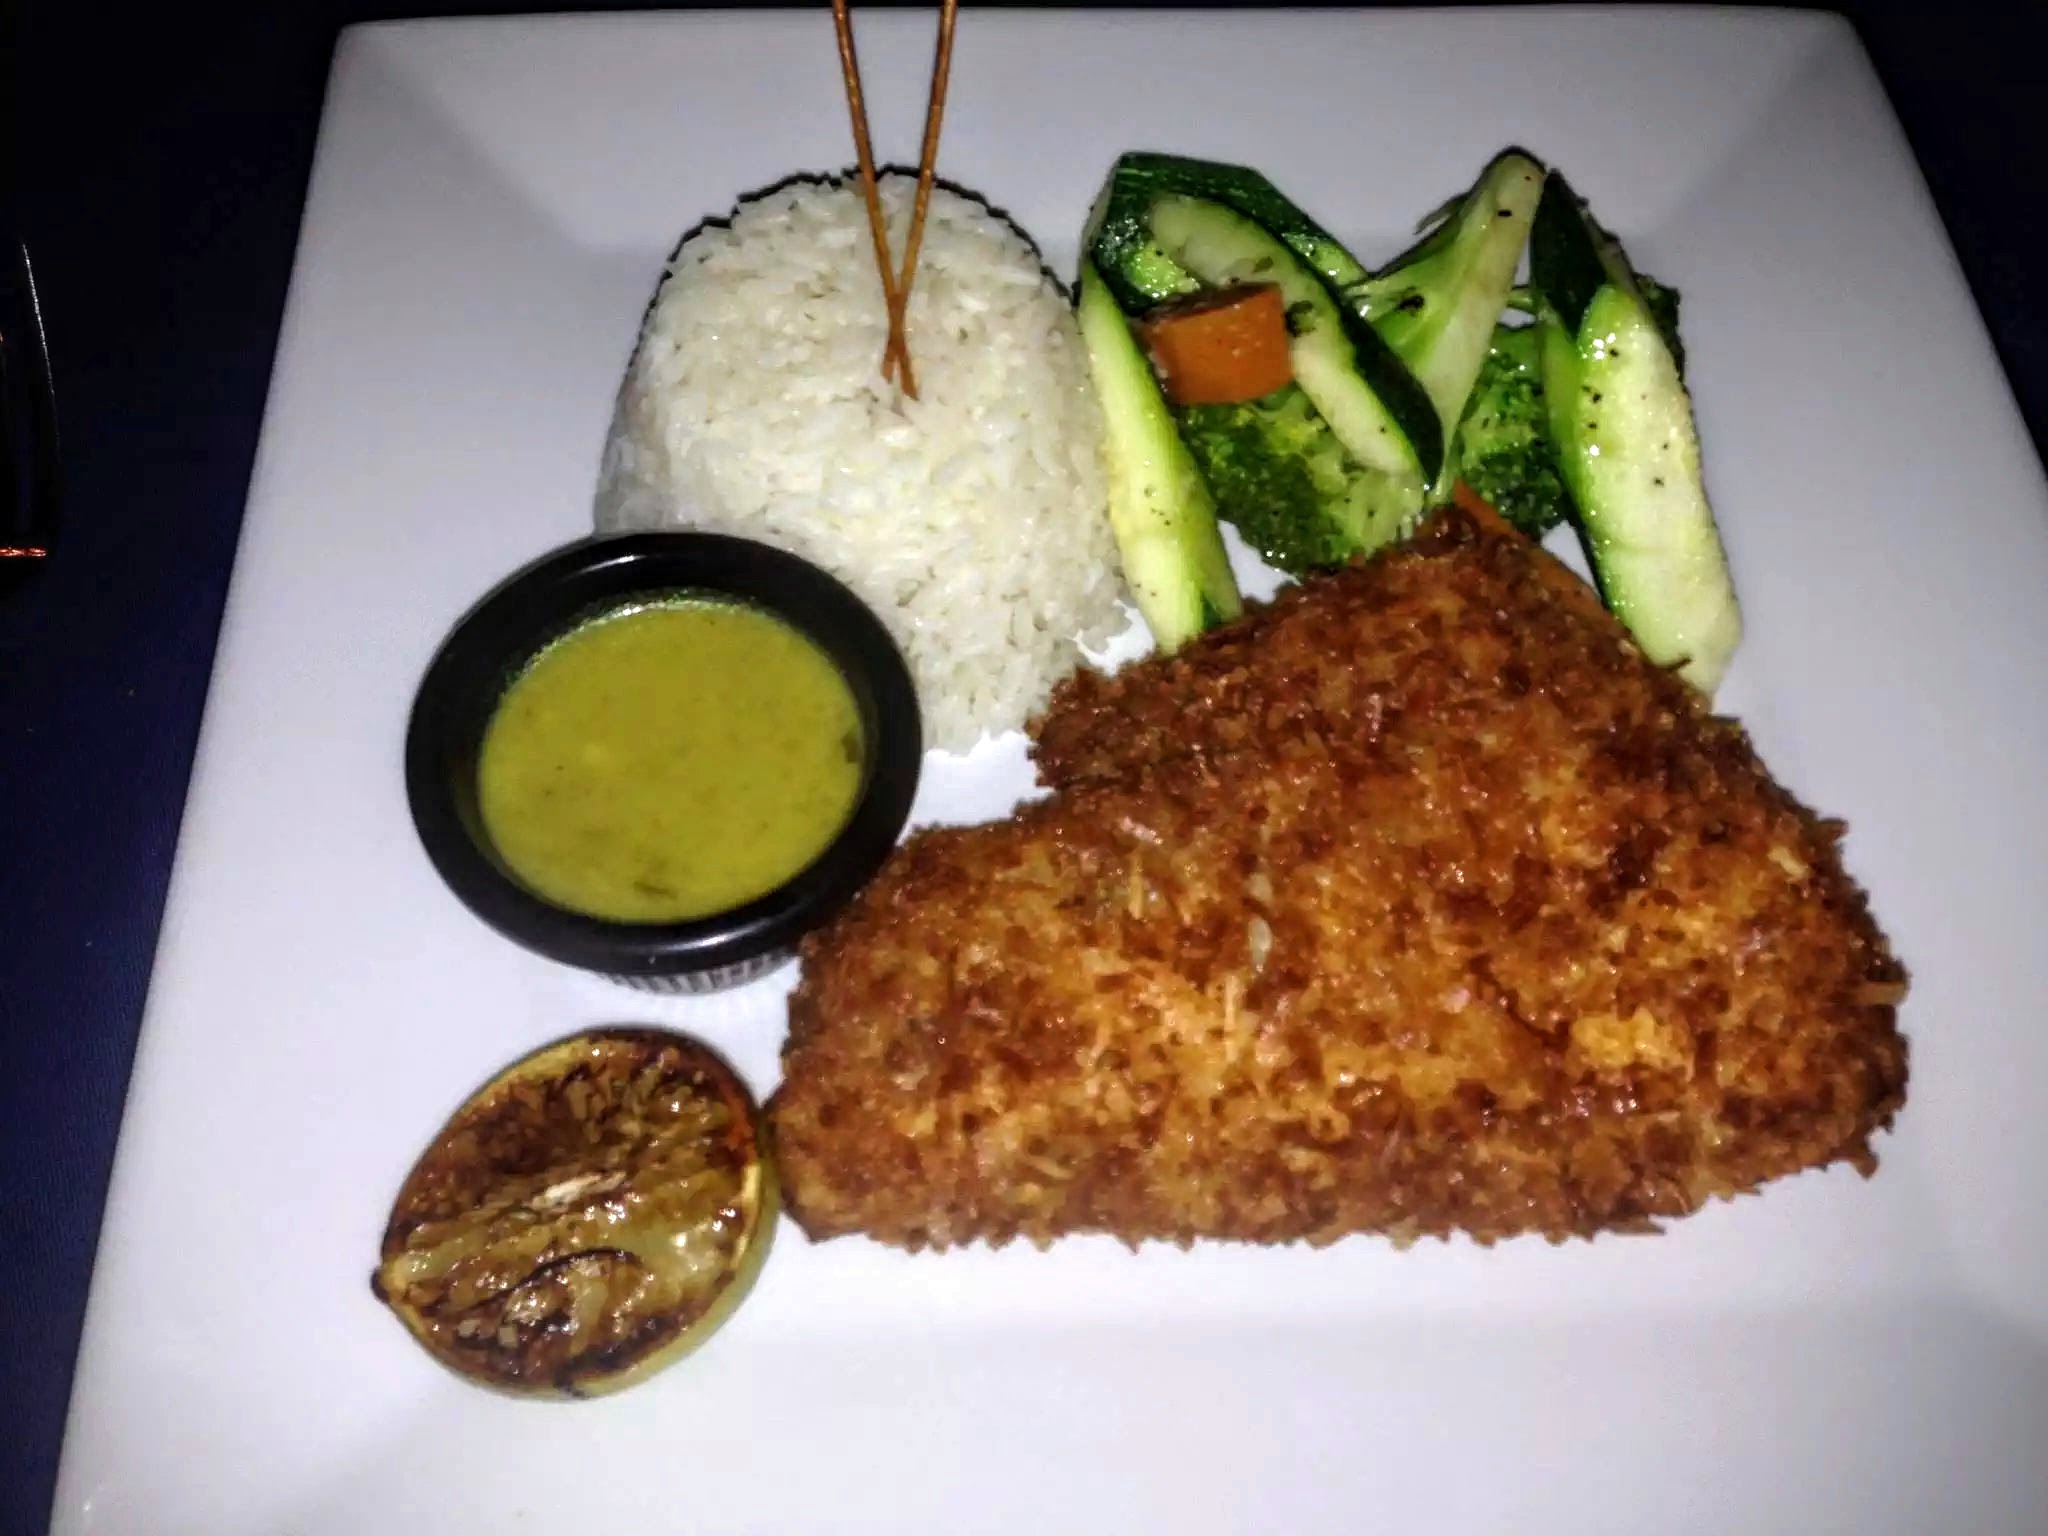 Coconut Crusted Grouper - Caicos Grouper House Dipped Coconut, Basmati Rice, Sauteed Seasonal Vegetables, Homemade Coconut Nectar